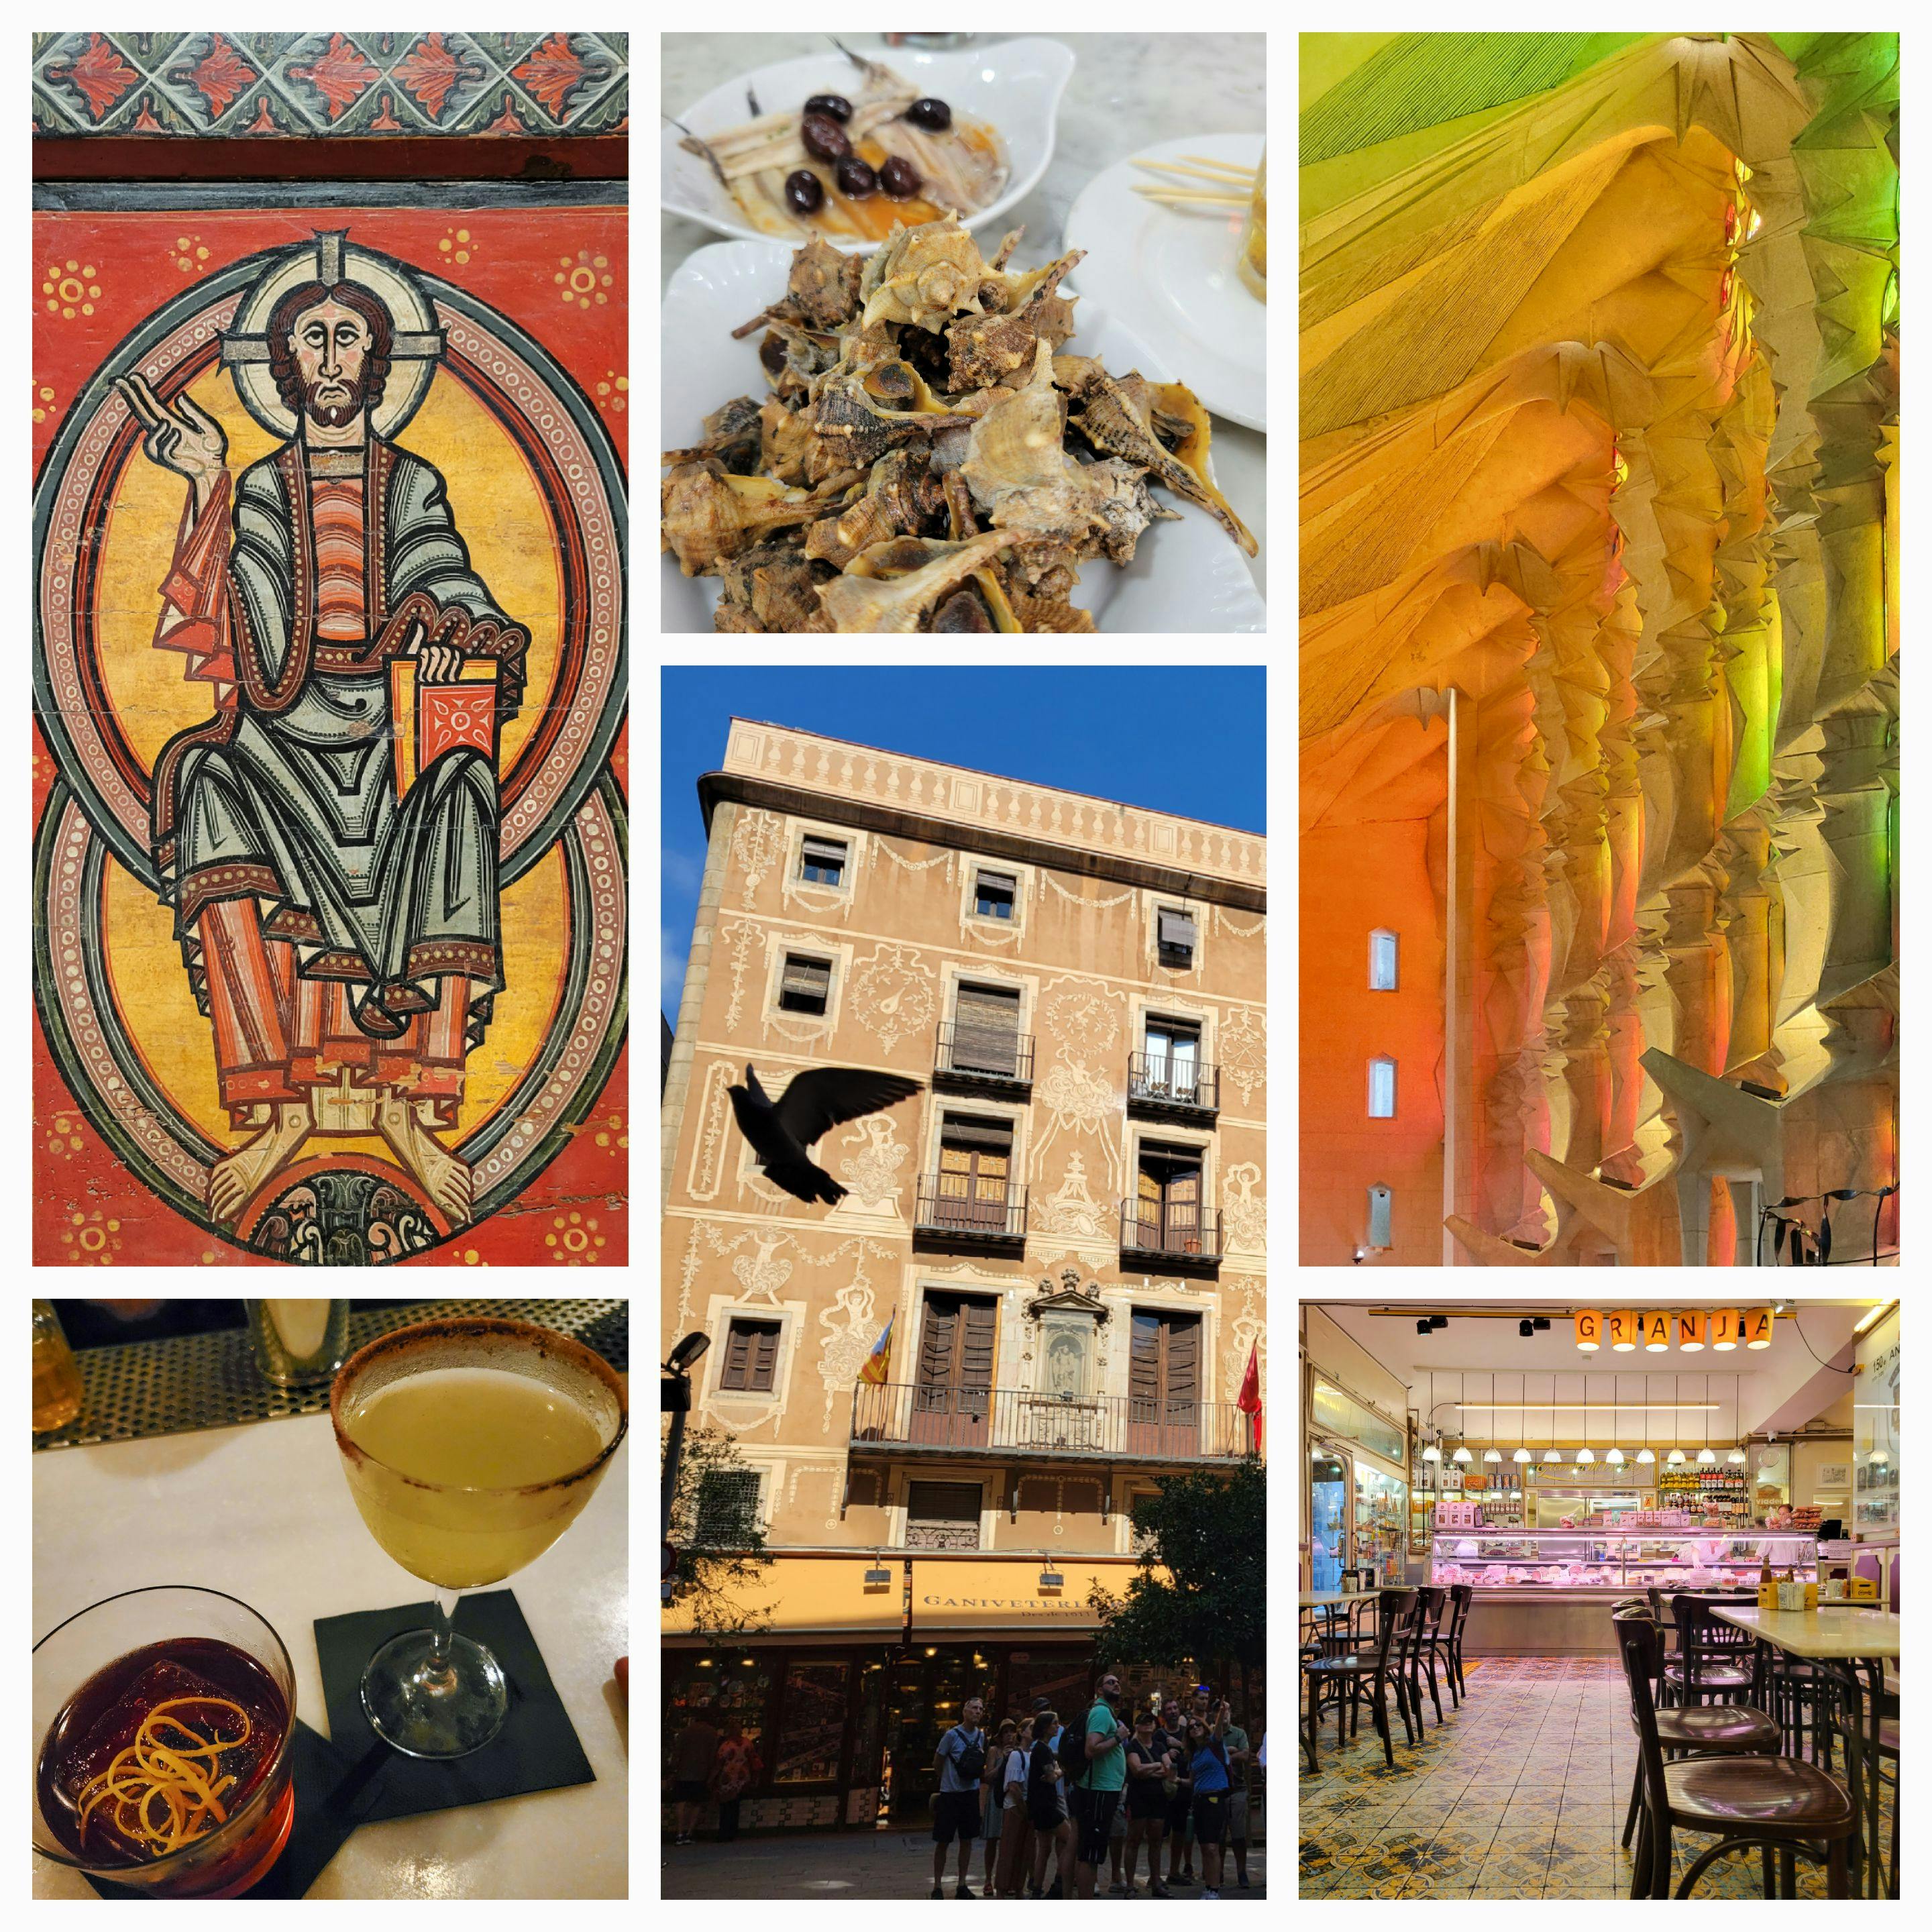 Collage of photos from Barcelona: Romanesque painting of Jesus, sea snails, detail of Sagrada Familia, cocktails, street scene, Granja M. Viader